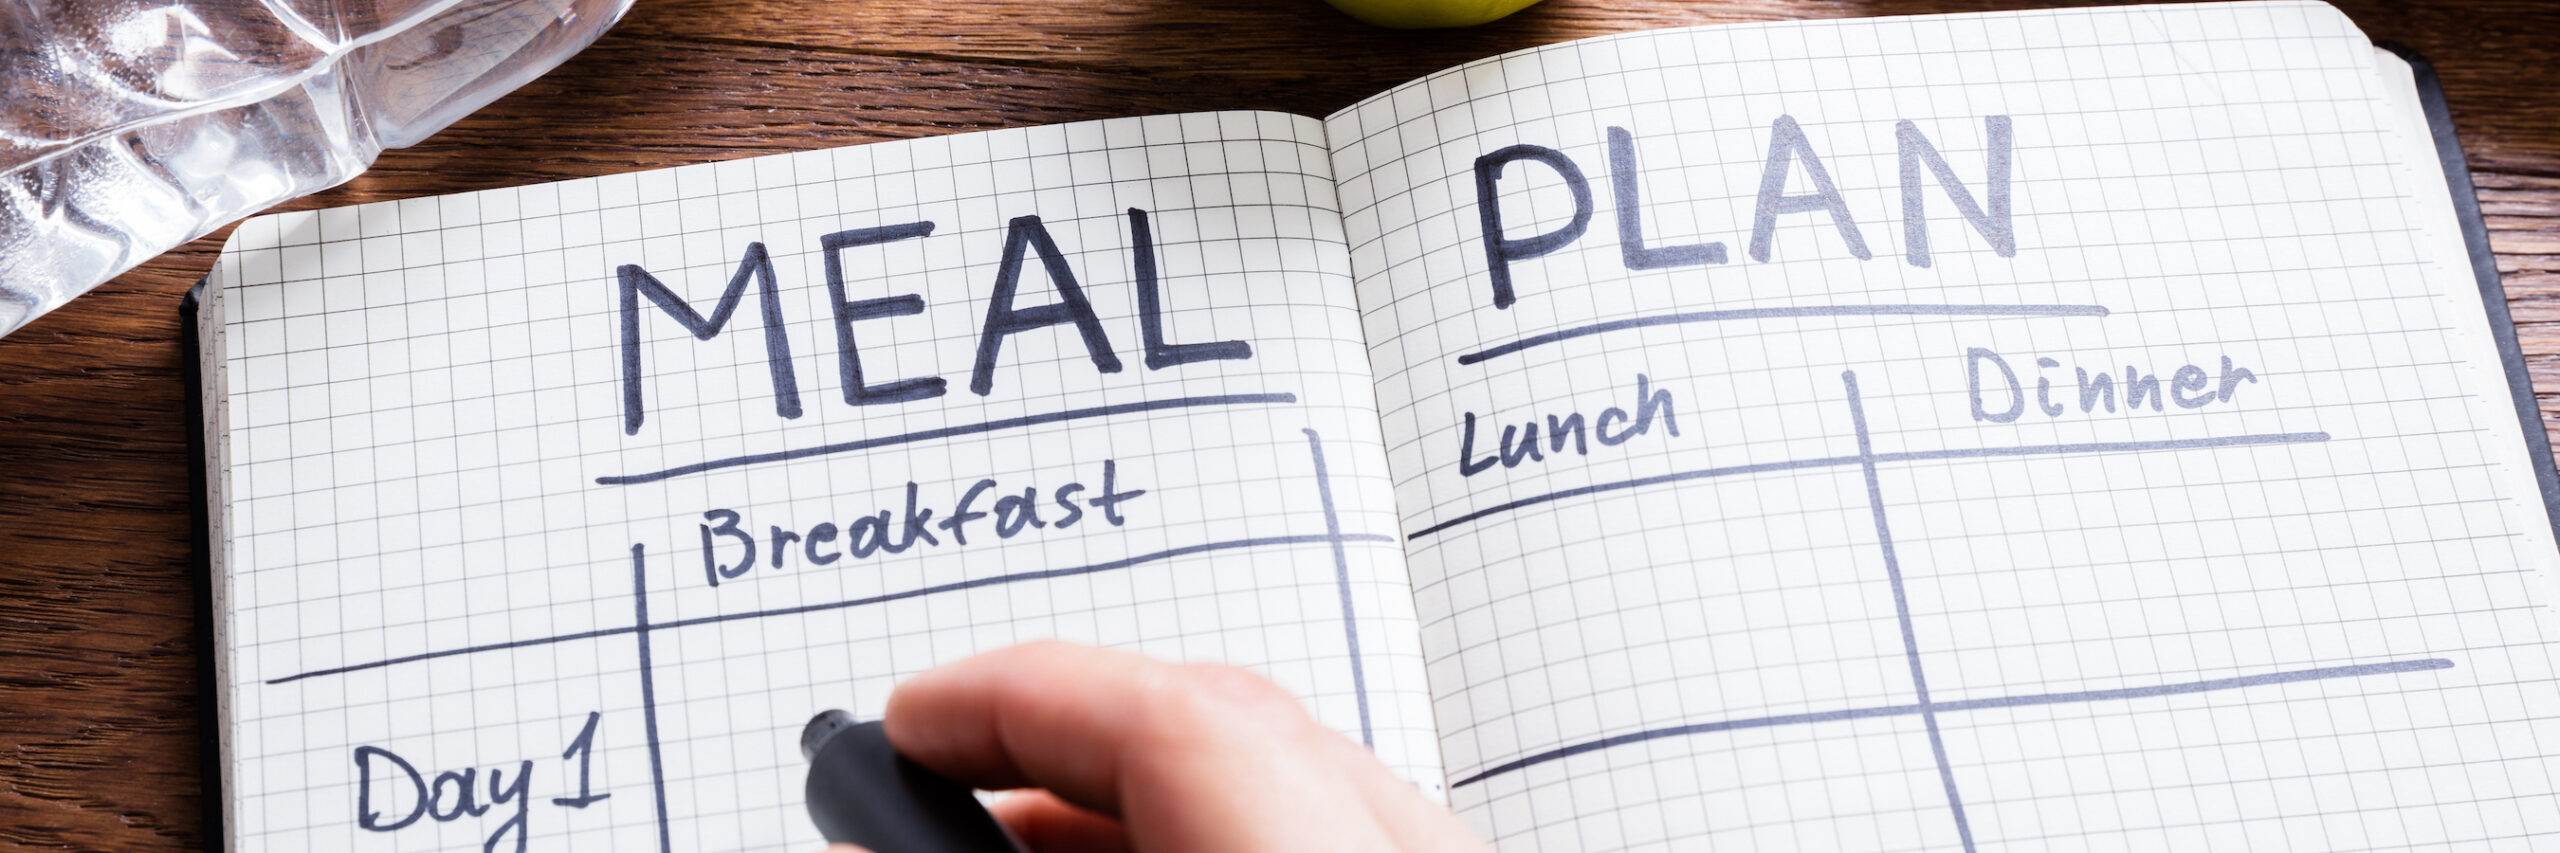 meal planning notebook to save time and money and stay healthy